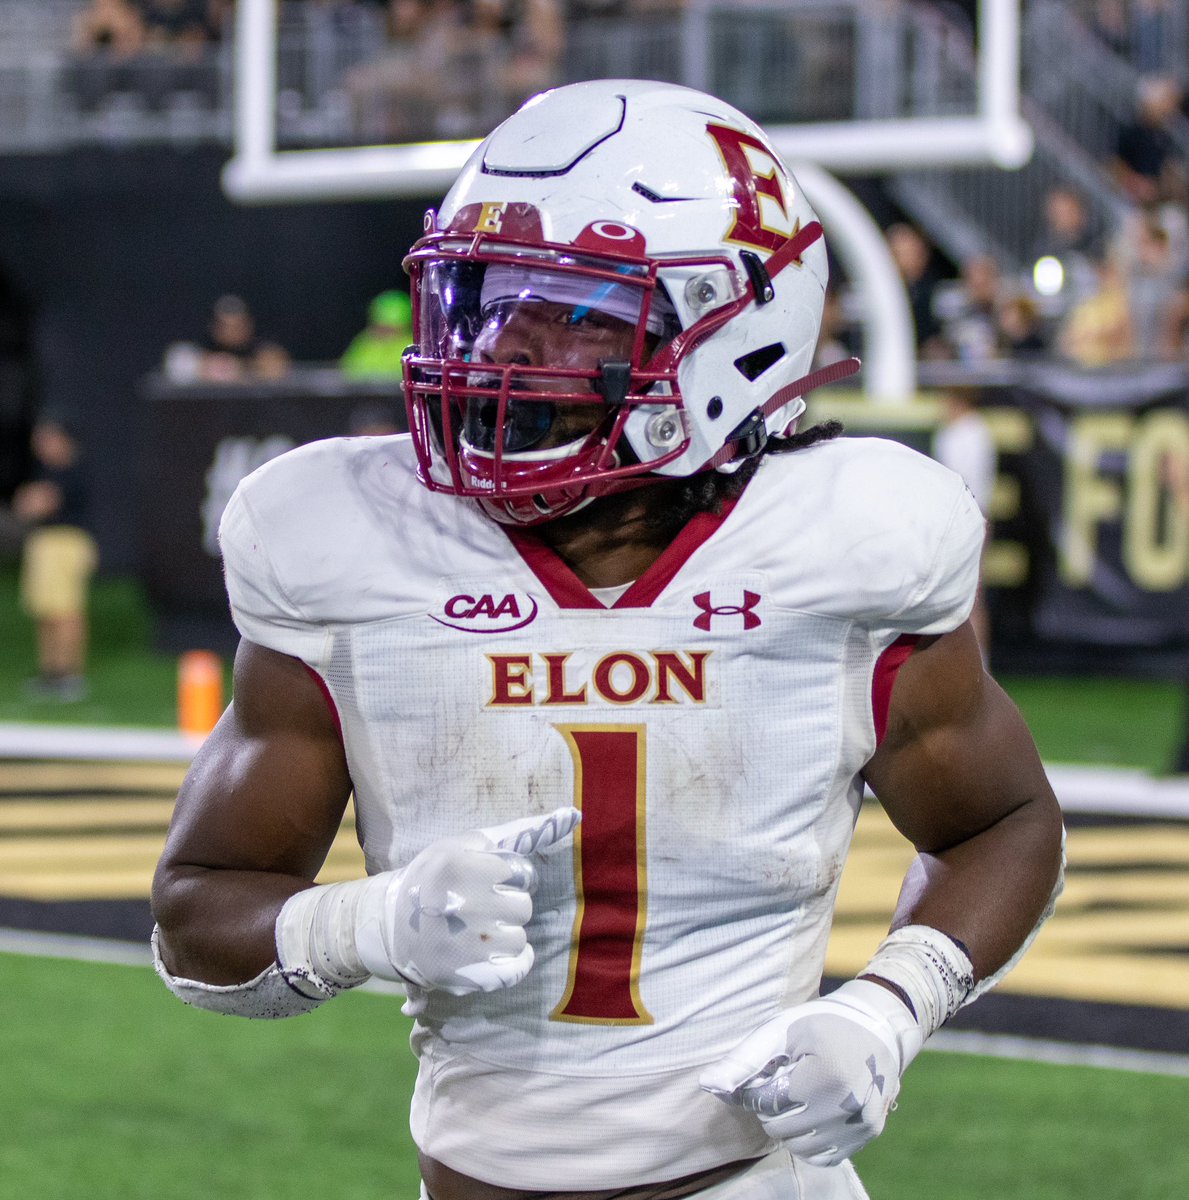 #AGTG After a great conversation with @Coach___E, I am blessed to receive an offer from Elon university! #AED @247Sports @ChadSimmons_ @On3Recruits @SWiltfong247 @RustyMansell_ @adamgorney @Rivalsfriedman @JeremyO_Johnson @MohrRecruiting @bsa28_